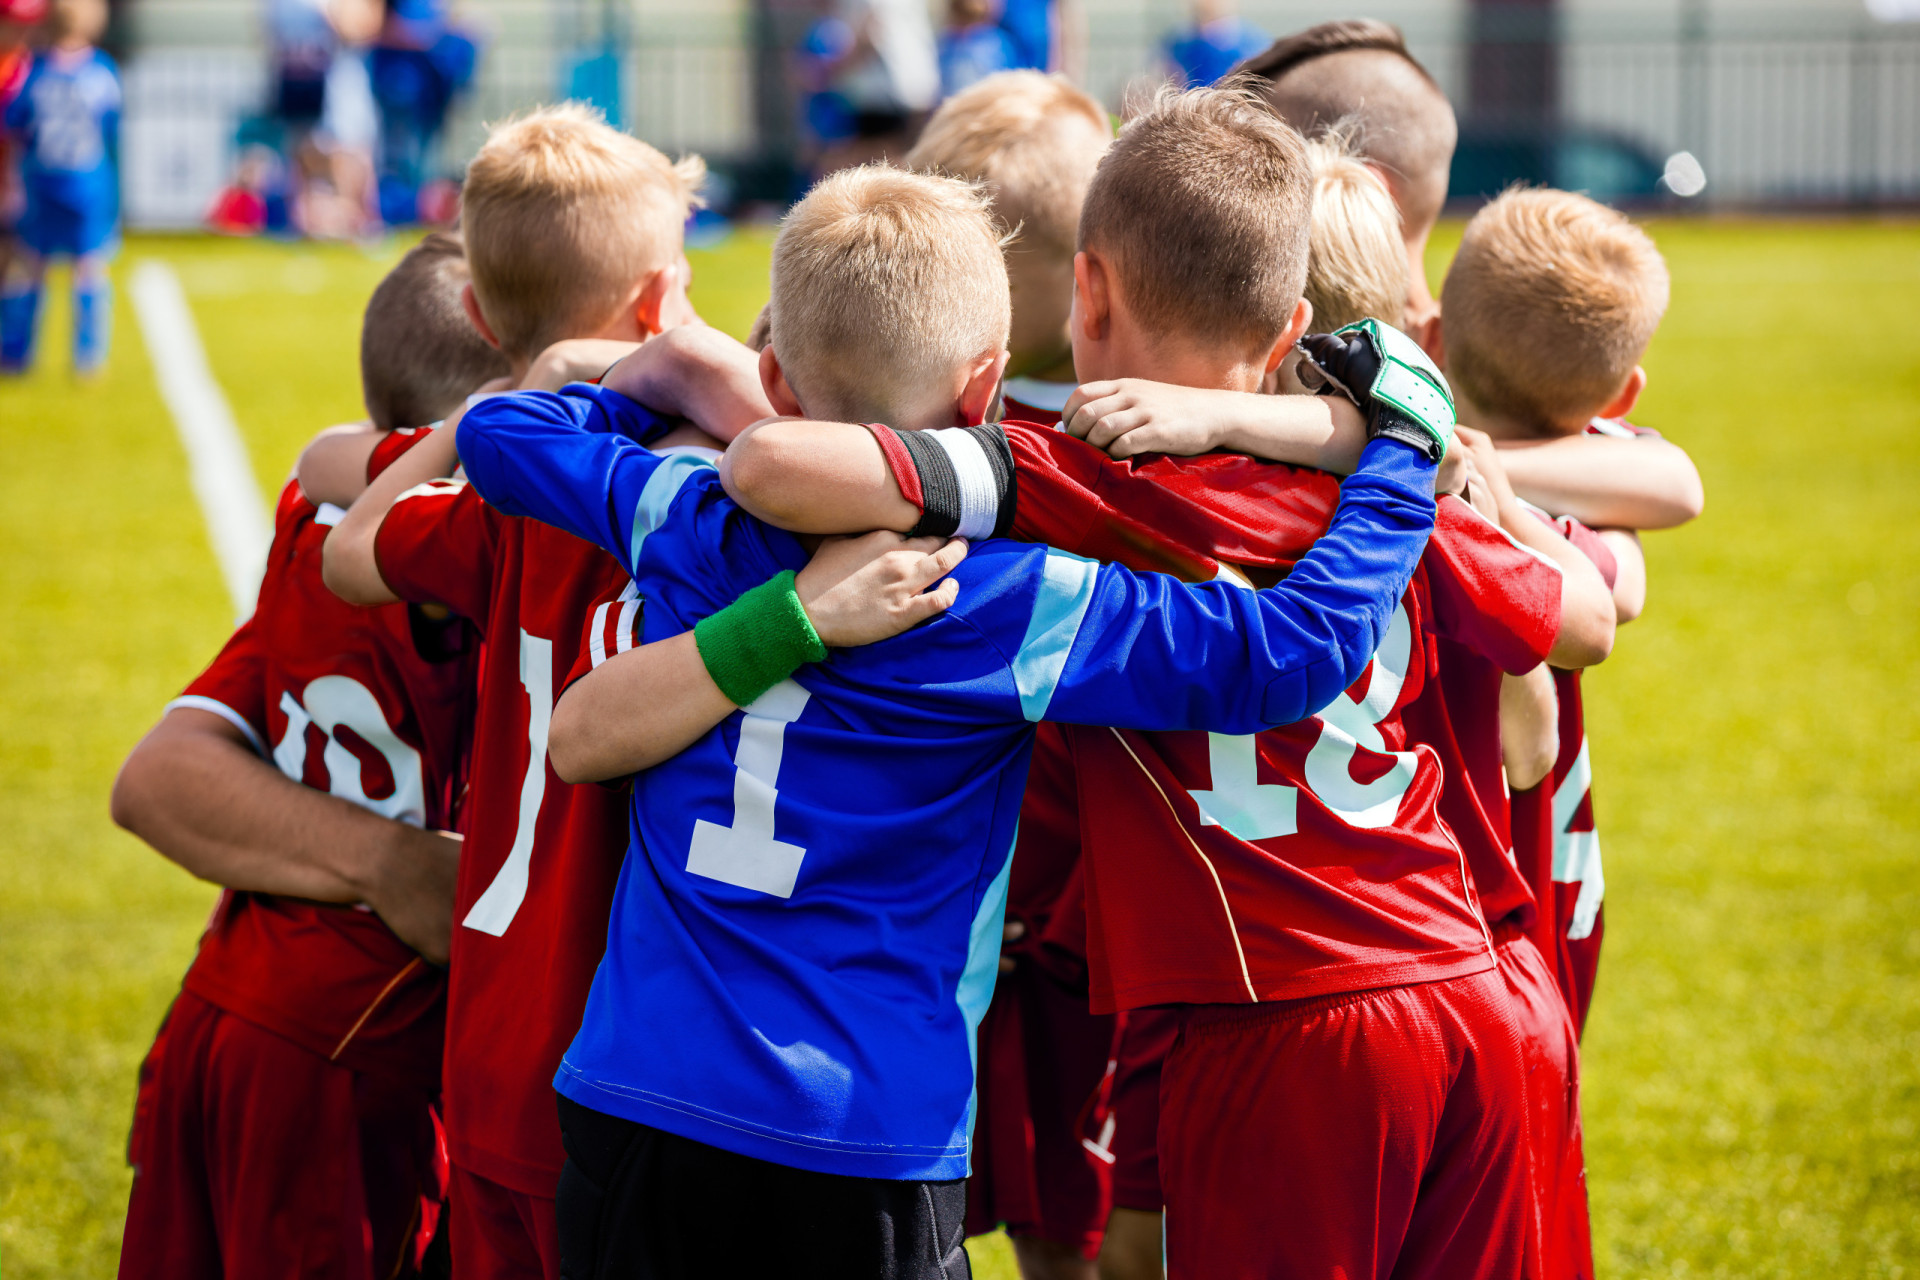 <p>Teaching kids good sportsmanship goes beyond the game. It's about showing respect for opponents, handling wins and losses gracefully, and valuing fair play.</p><p>You may also like:<a href="https://www.starsinsider.com/n/274925?utm_source=msn.com&utm_medium=display&utm_campaign=referral_description&utm_content=588009en-en"> Celebrities reveal their phobias and greatest fears</a></p>